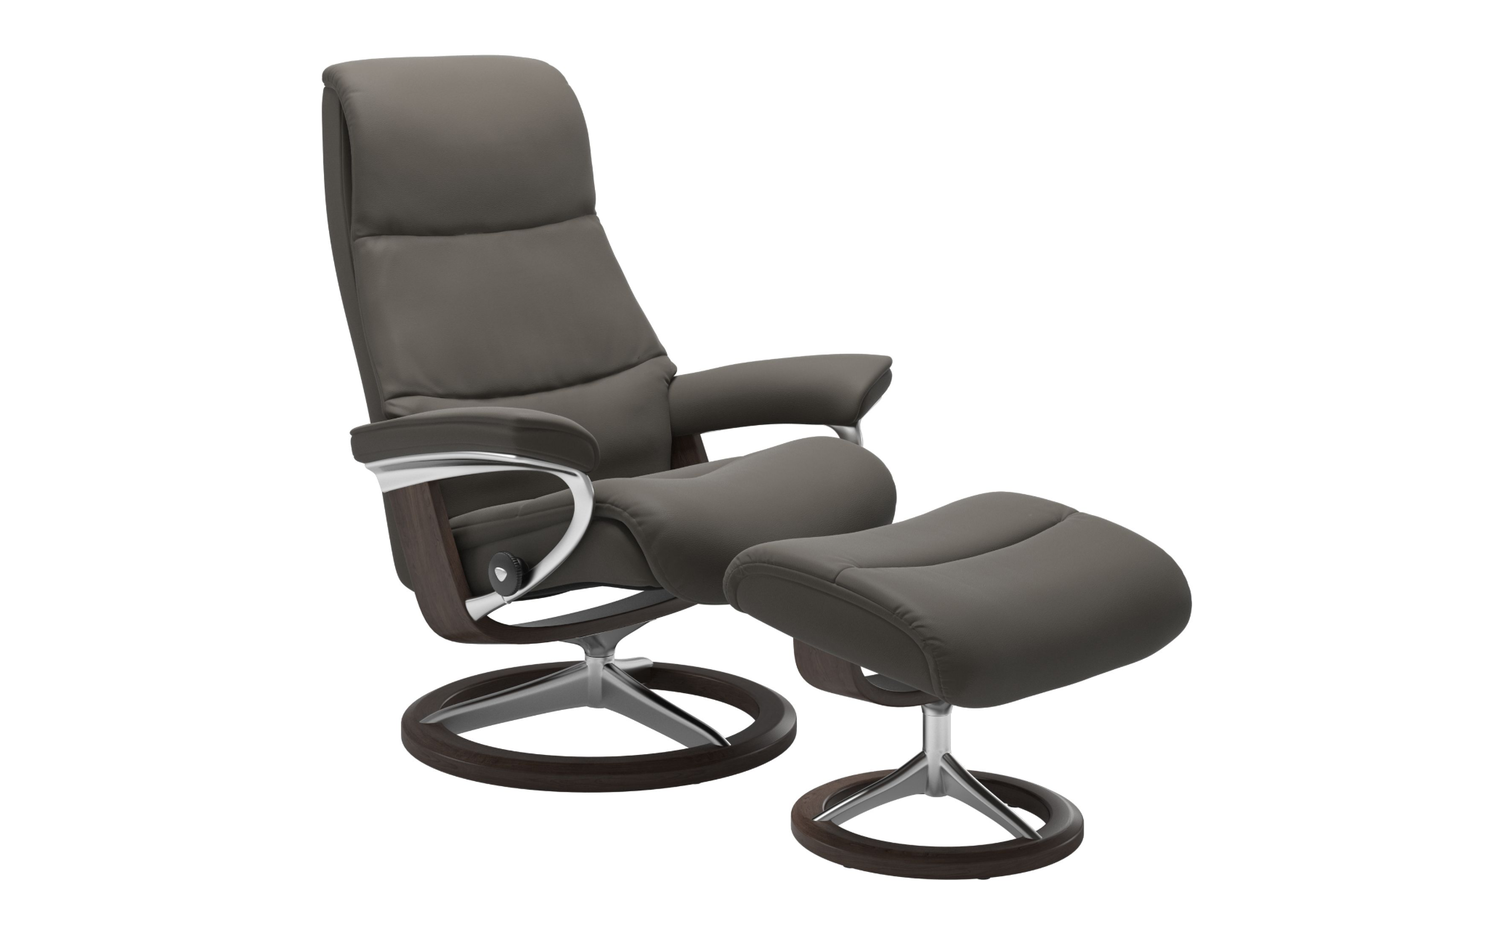 Stressless View – Recliners SL